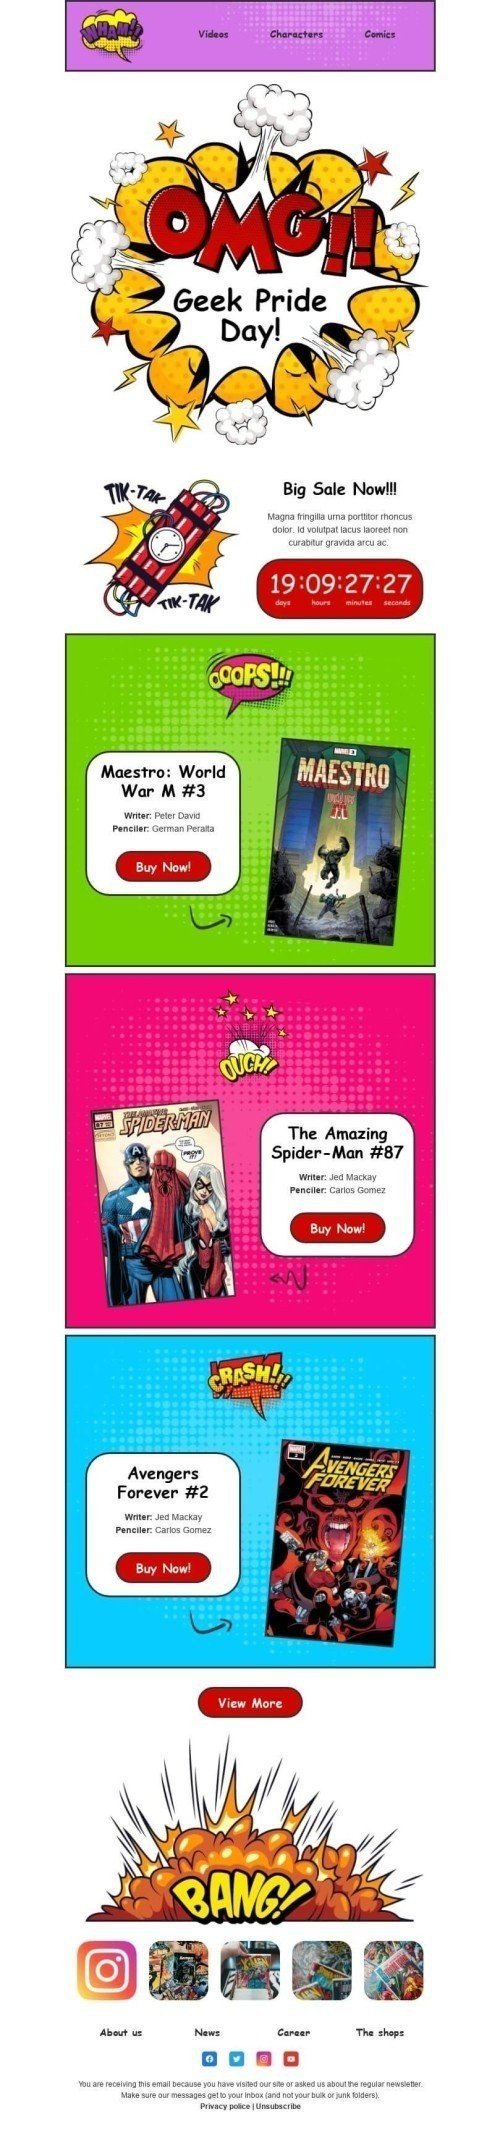 Geek Pride Day Email Template "Announcing Big Sales in Video Games" for Hobbies industry mobile view